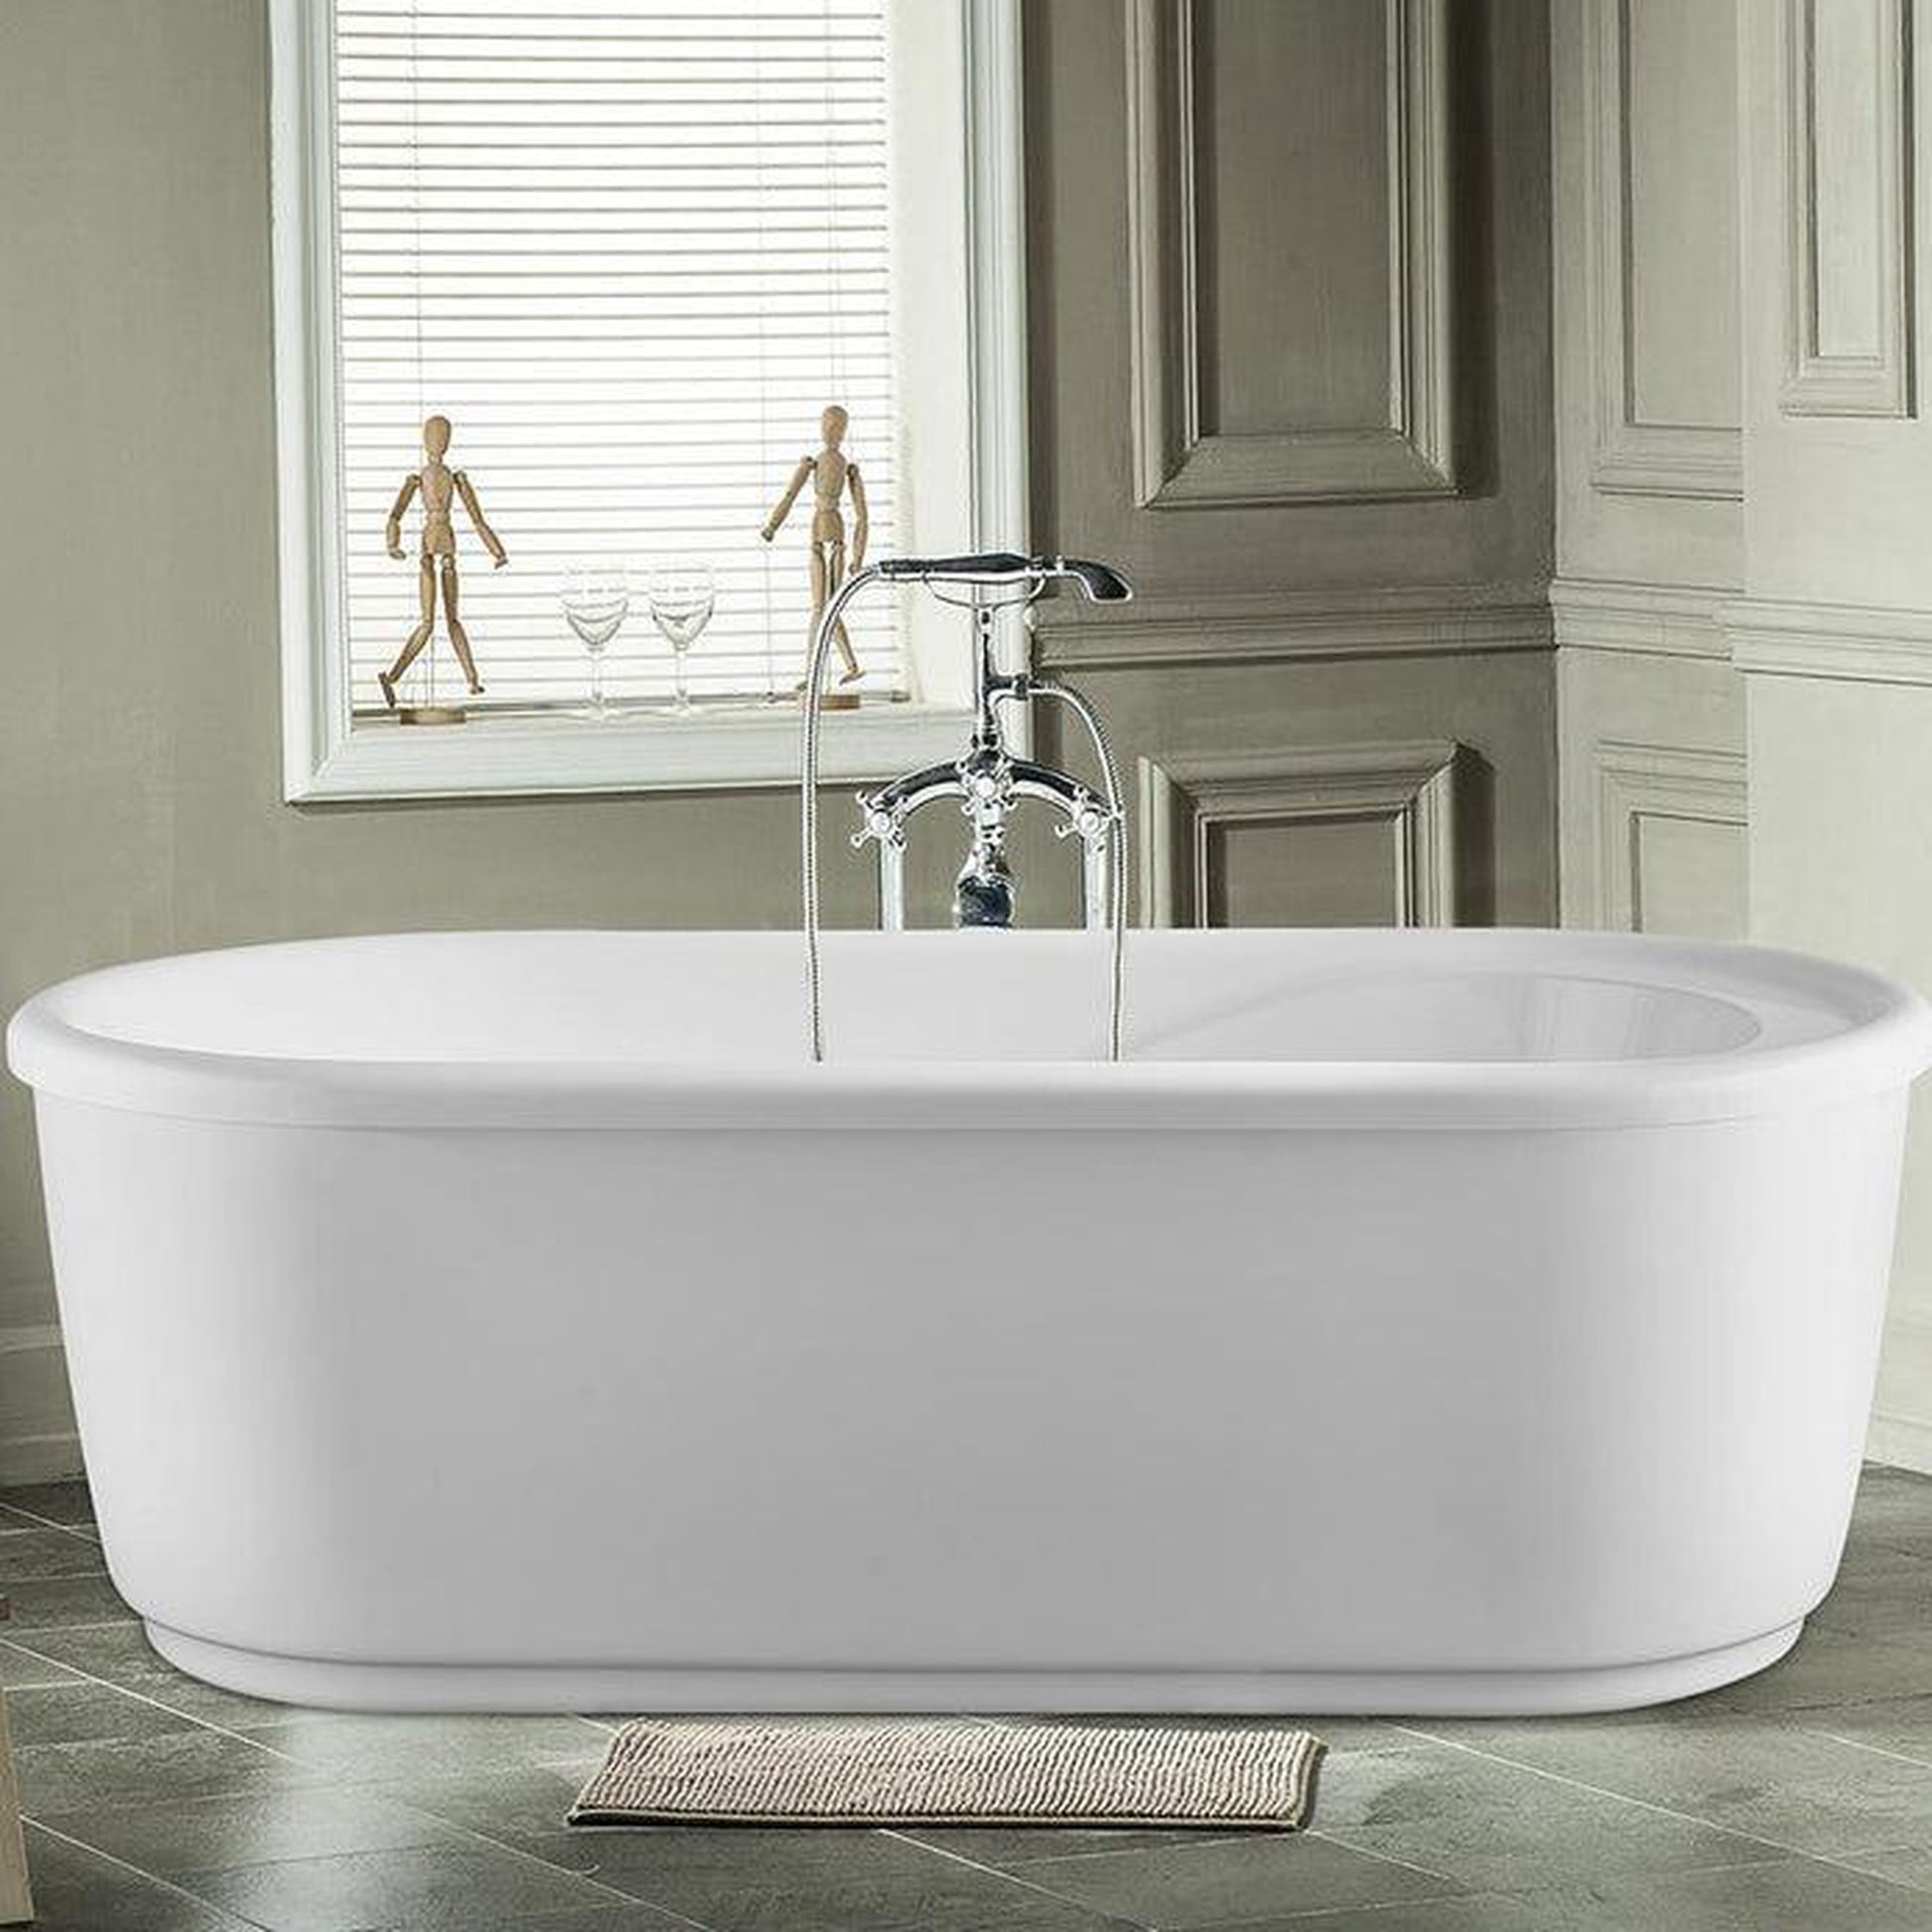 Vanity Art 67" W x 23" H White Acrylic Freestanding Bathtub With Polished Chrome Round Overflow and Pop-up Drain